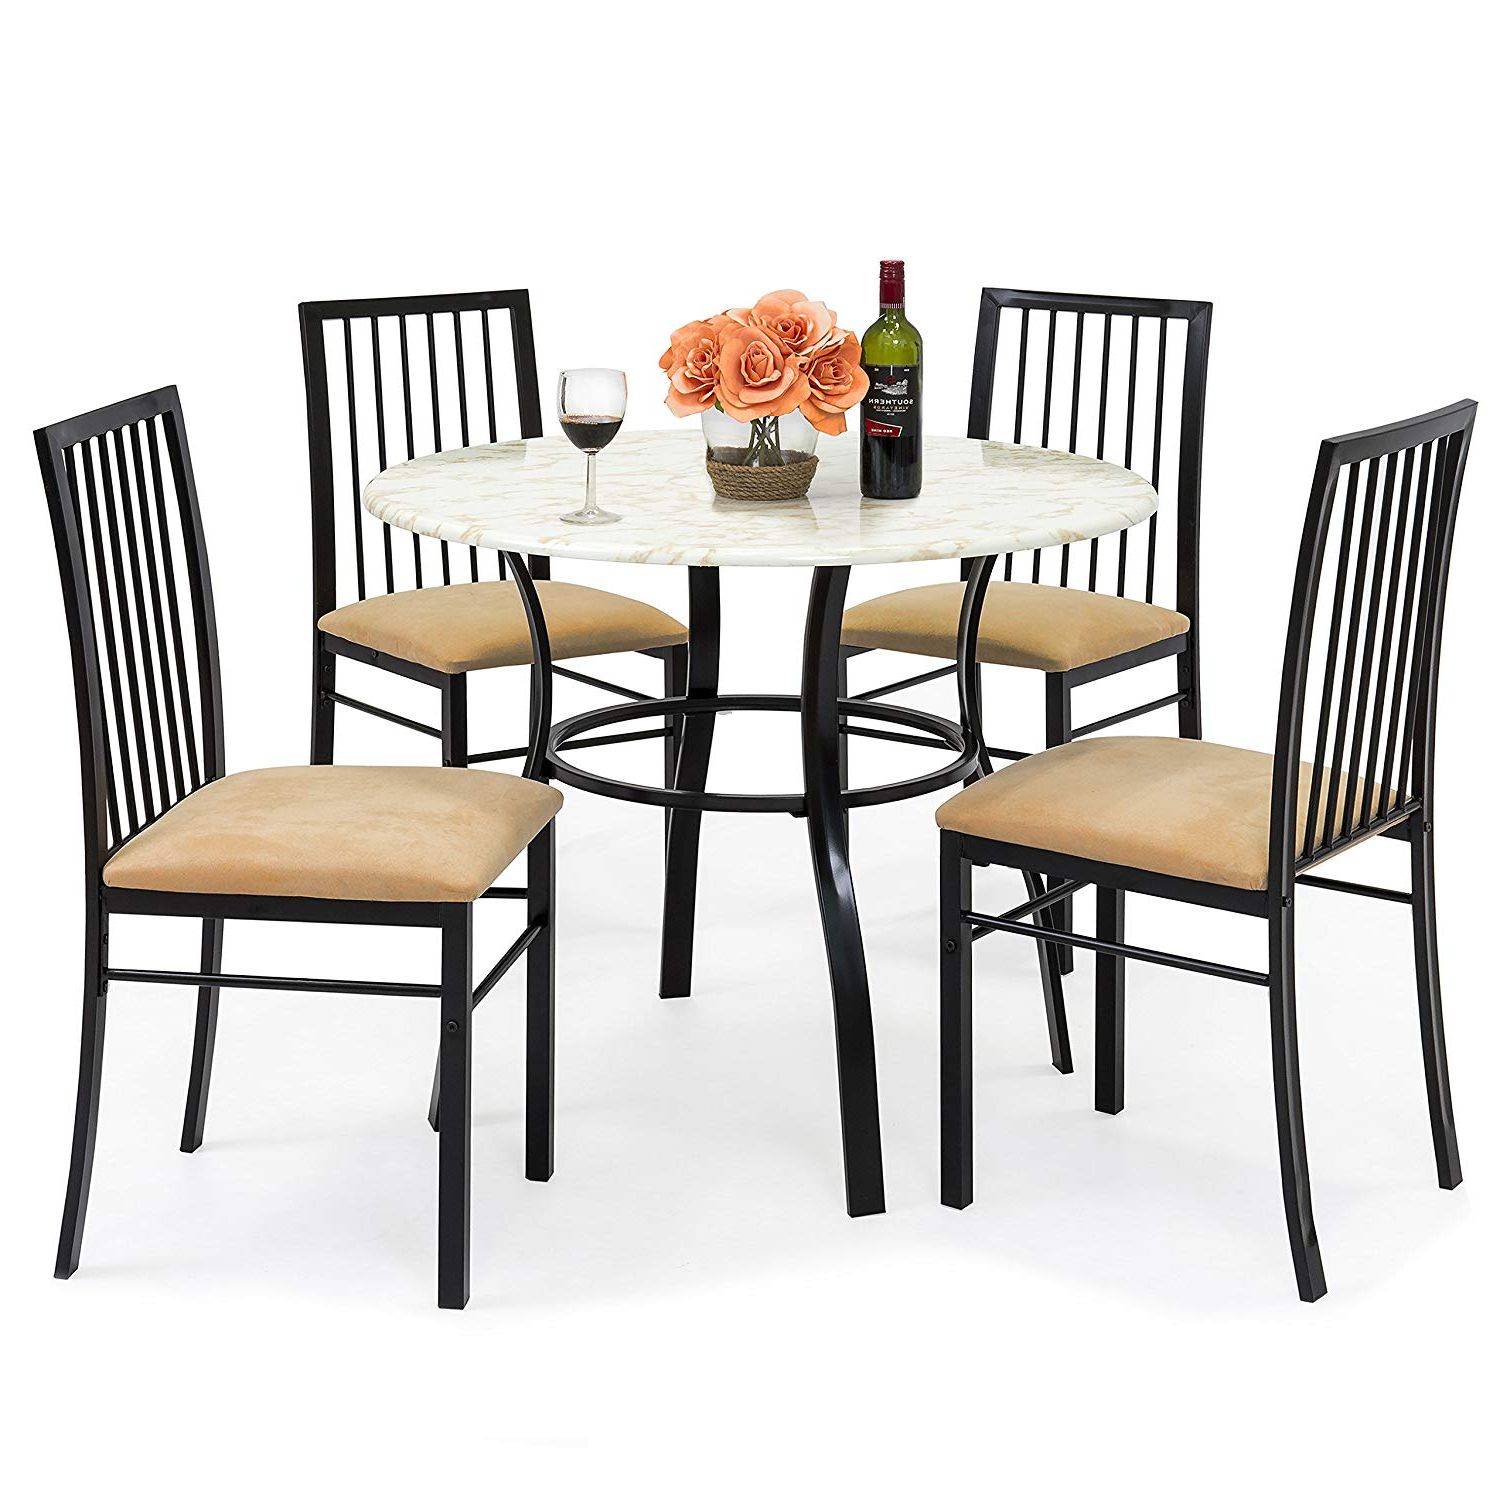 Evellen 5 Piece Solid Wood Dining Sets (set Of 5) For Popular Best Choice Products 5 Piece Faux Marble Top Dining Table And Chairs Set (View 2 of 20)